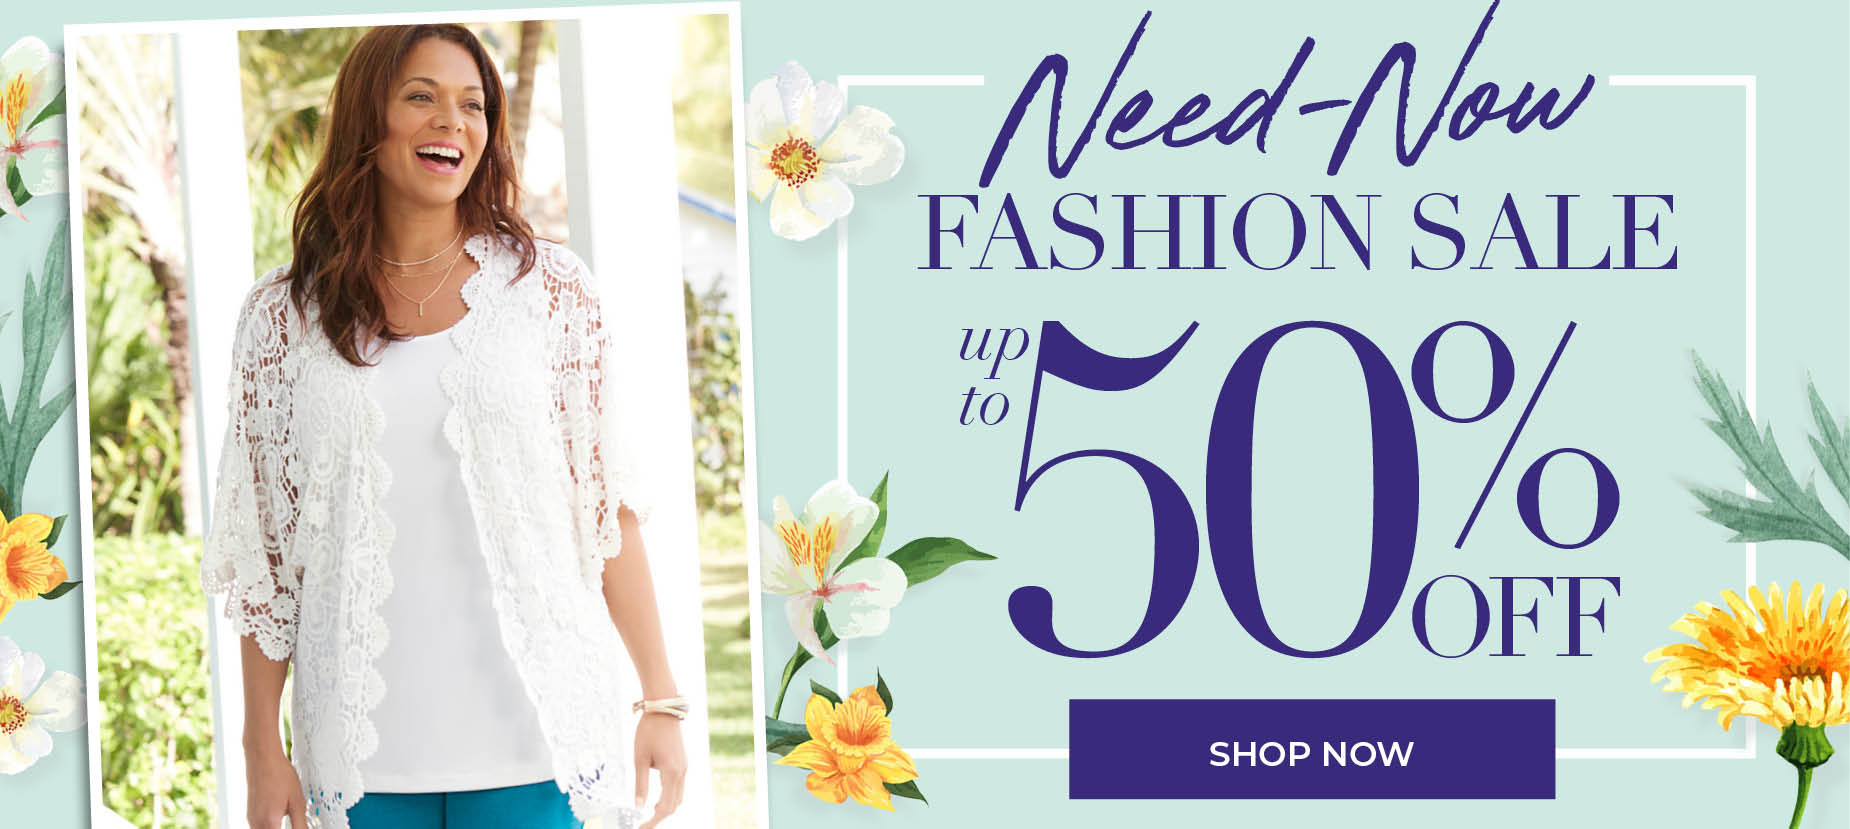 NEED-NOW FASHION SALE. SAVE UP TO 50% OFF